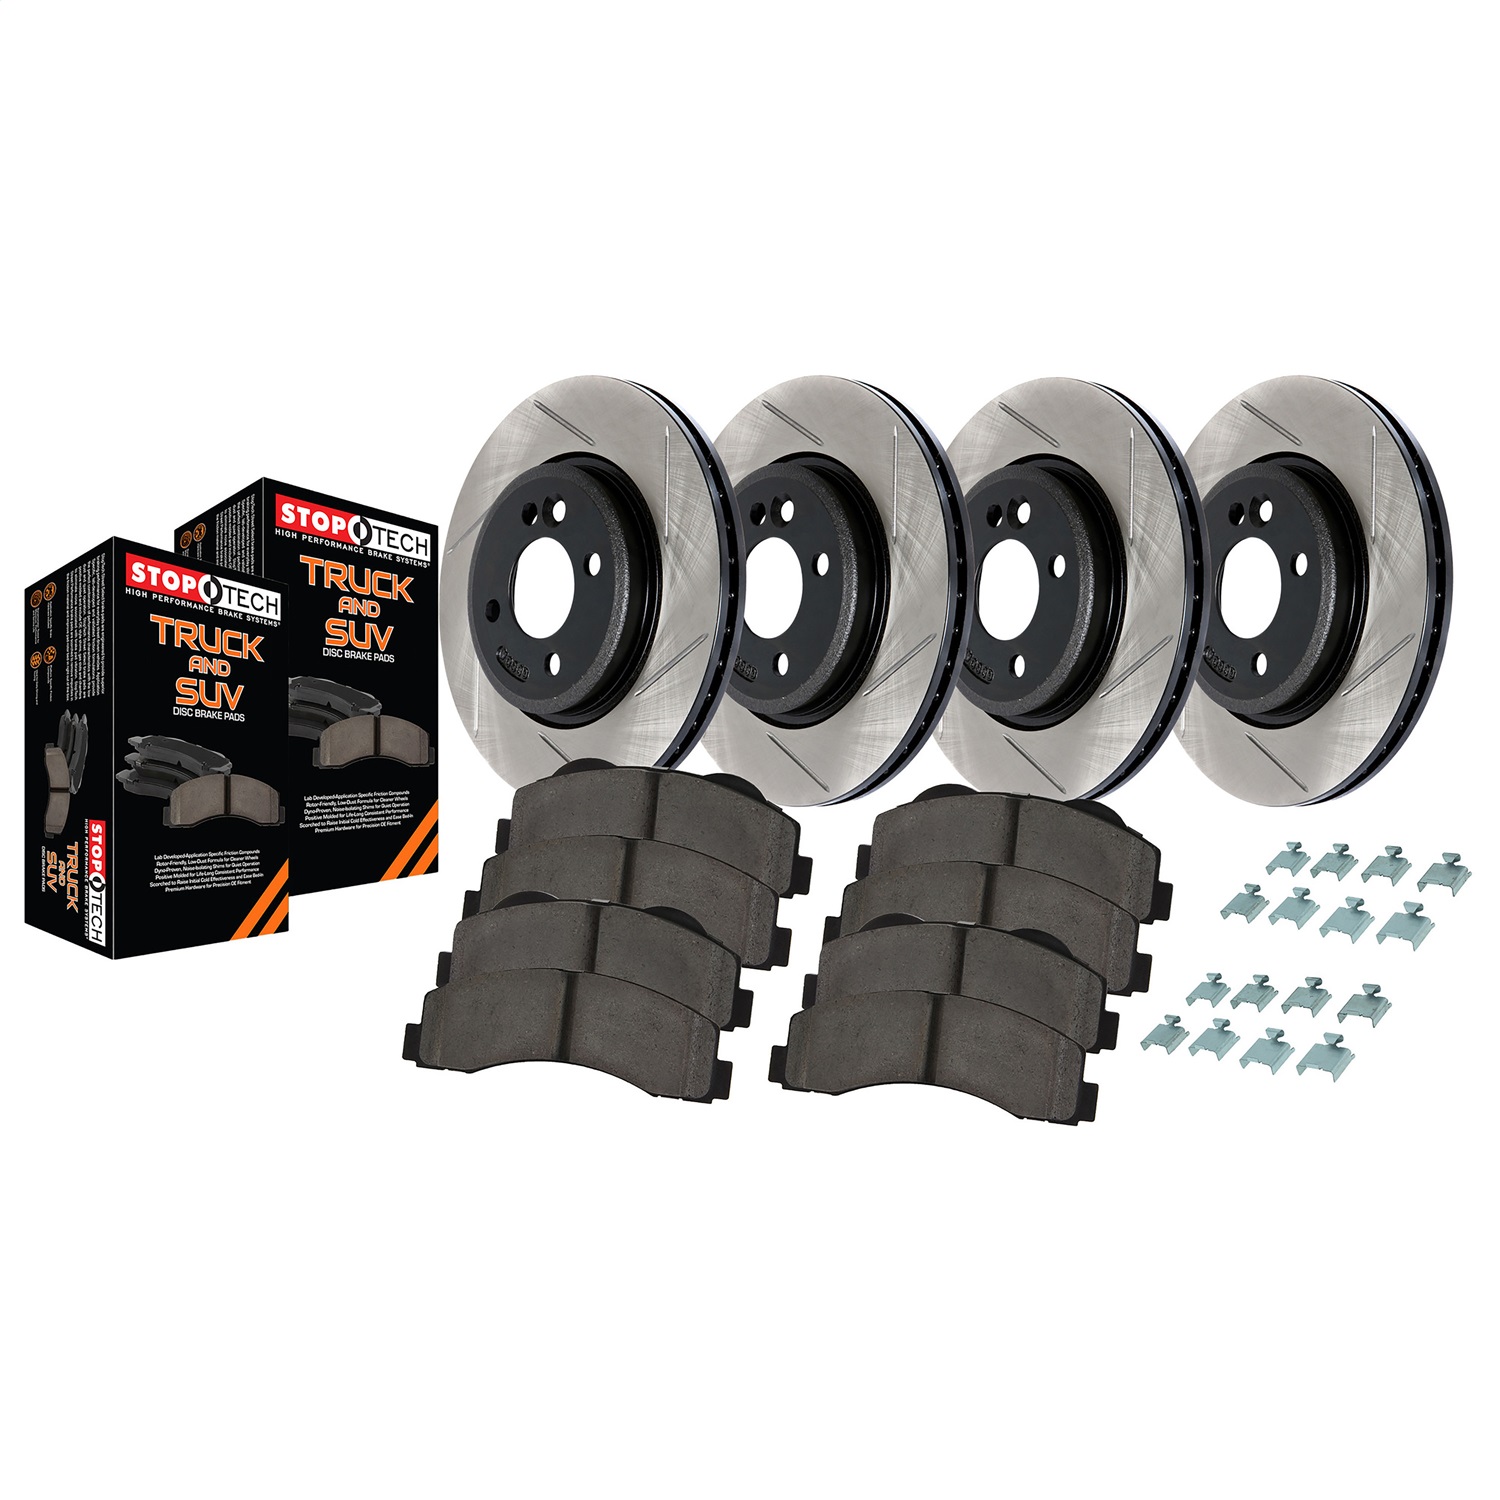 StopTech 967.44017 Truck Performance - 4 Wheel Disc Brake Kit w/Slotted Rotor